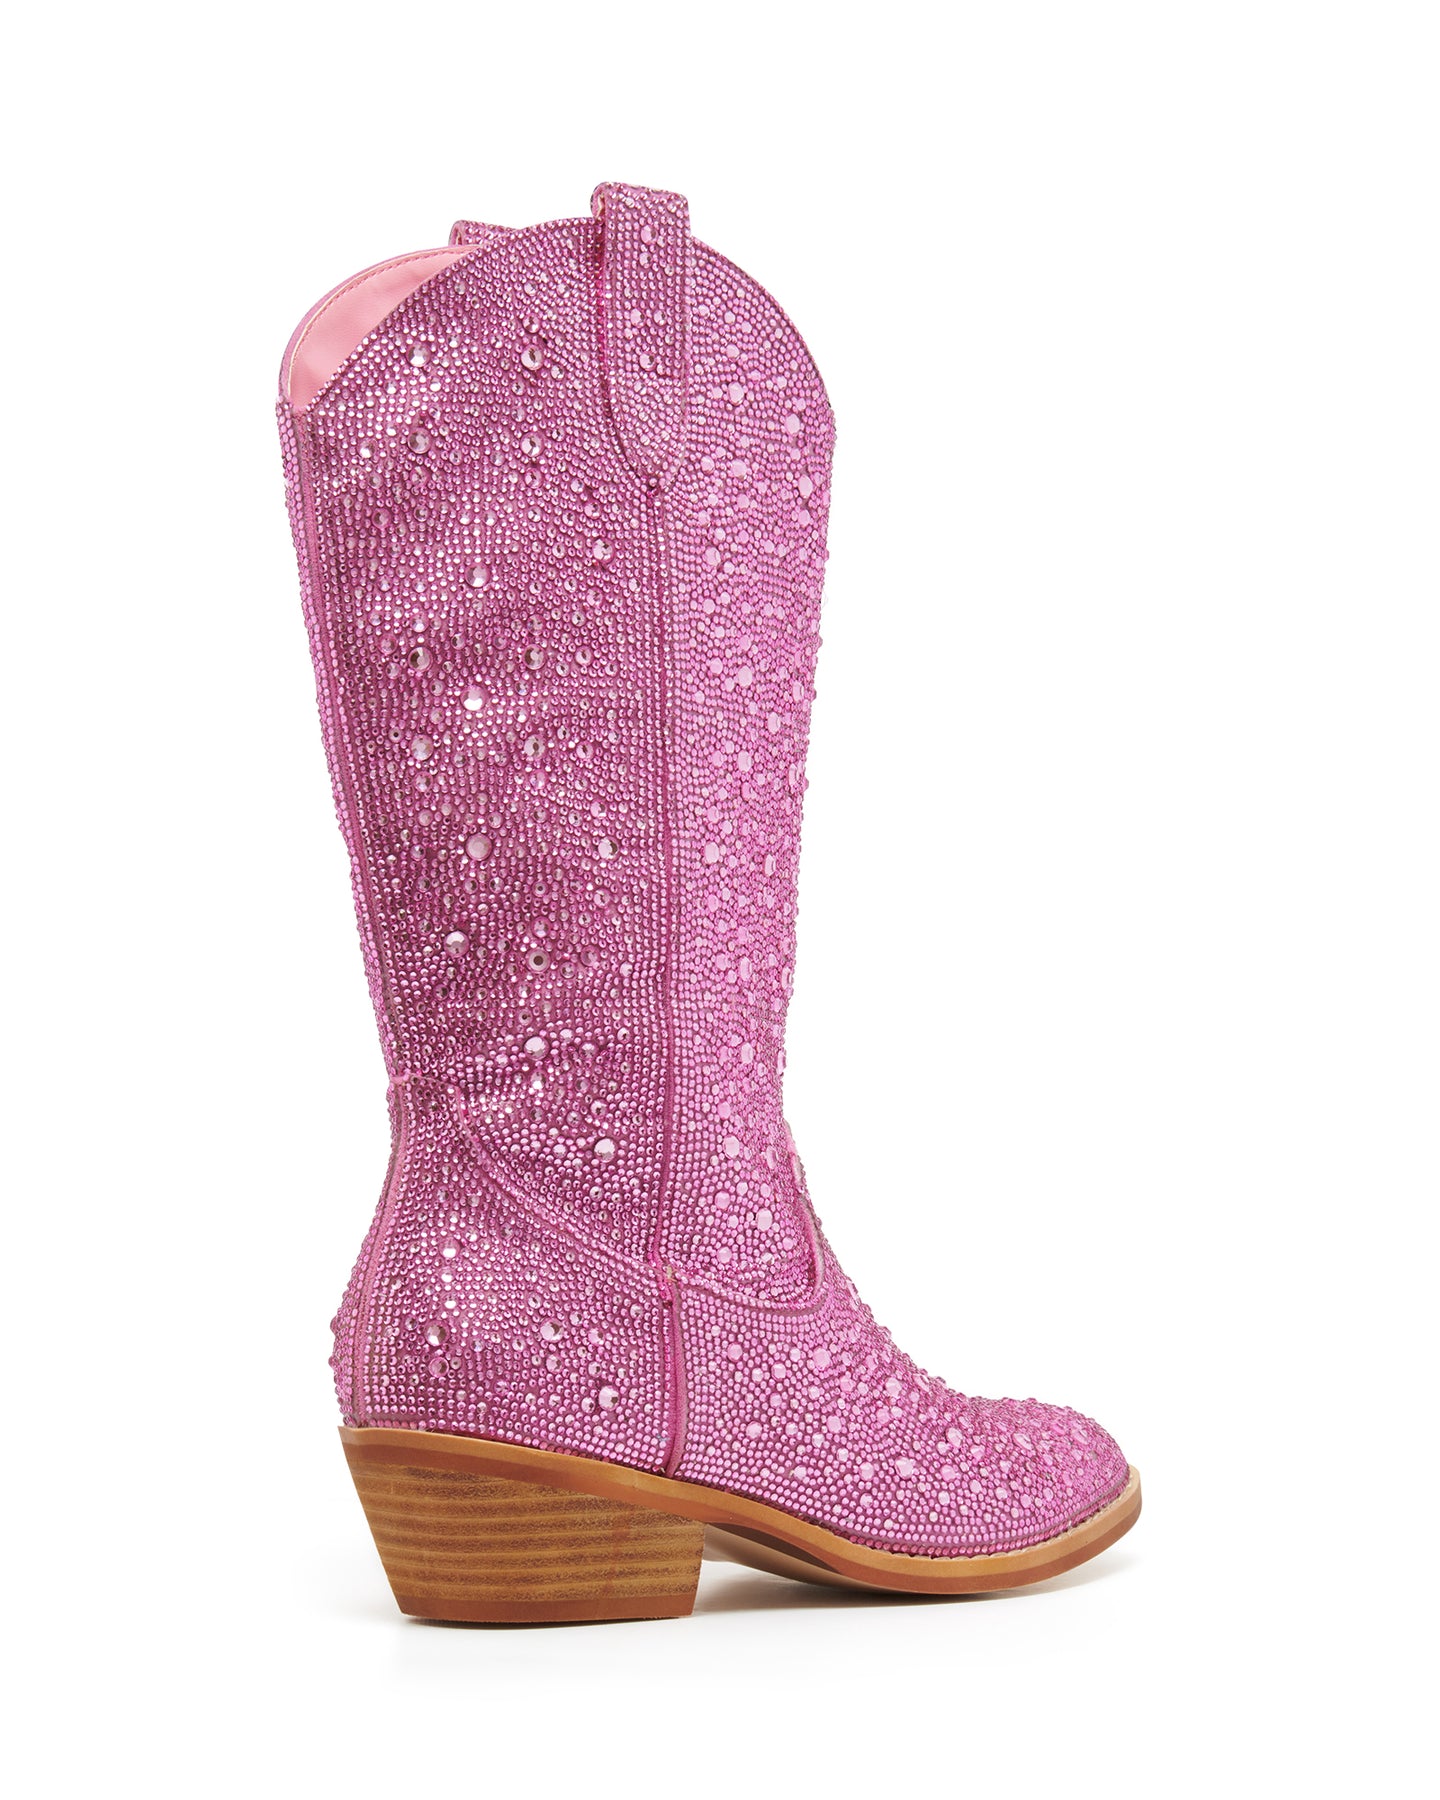 Therapy Shoes Majesty Pink Rhinestones | Women's Boots | Western ...